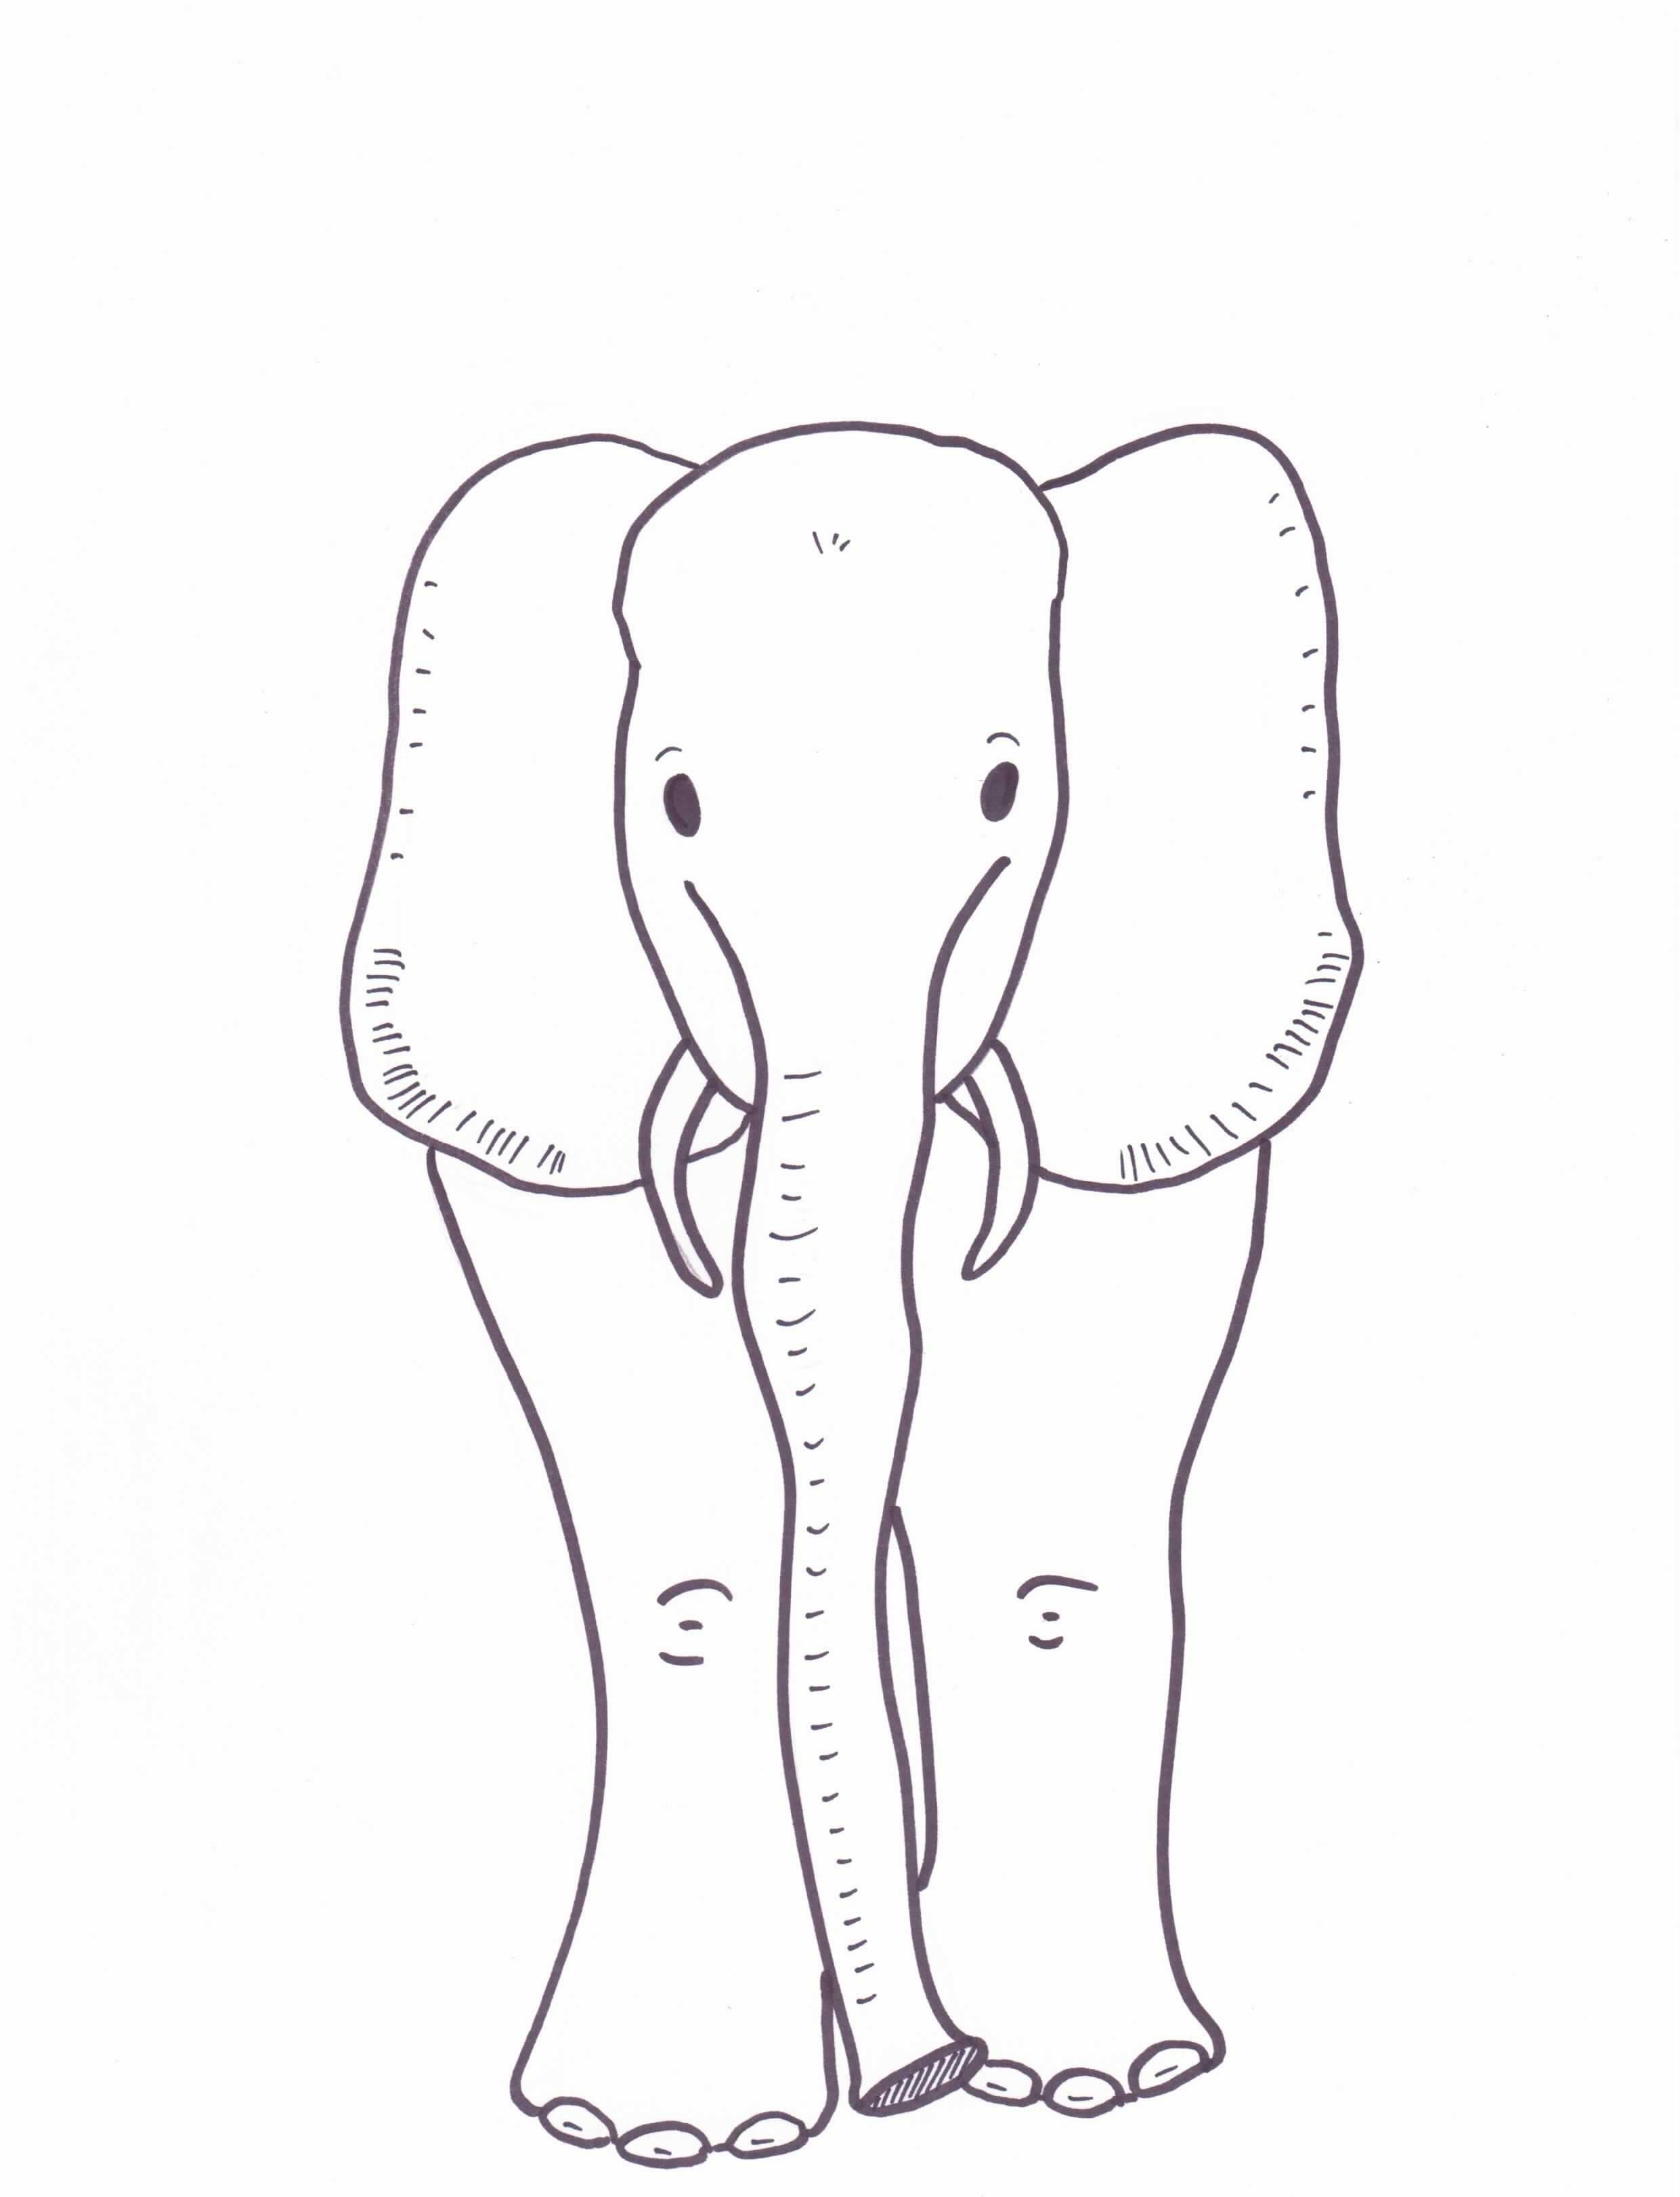 preschool elephant coloring pages